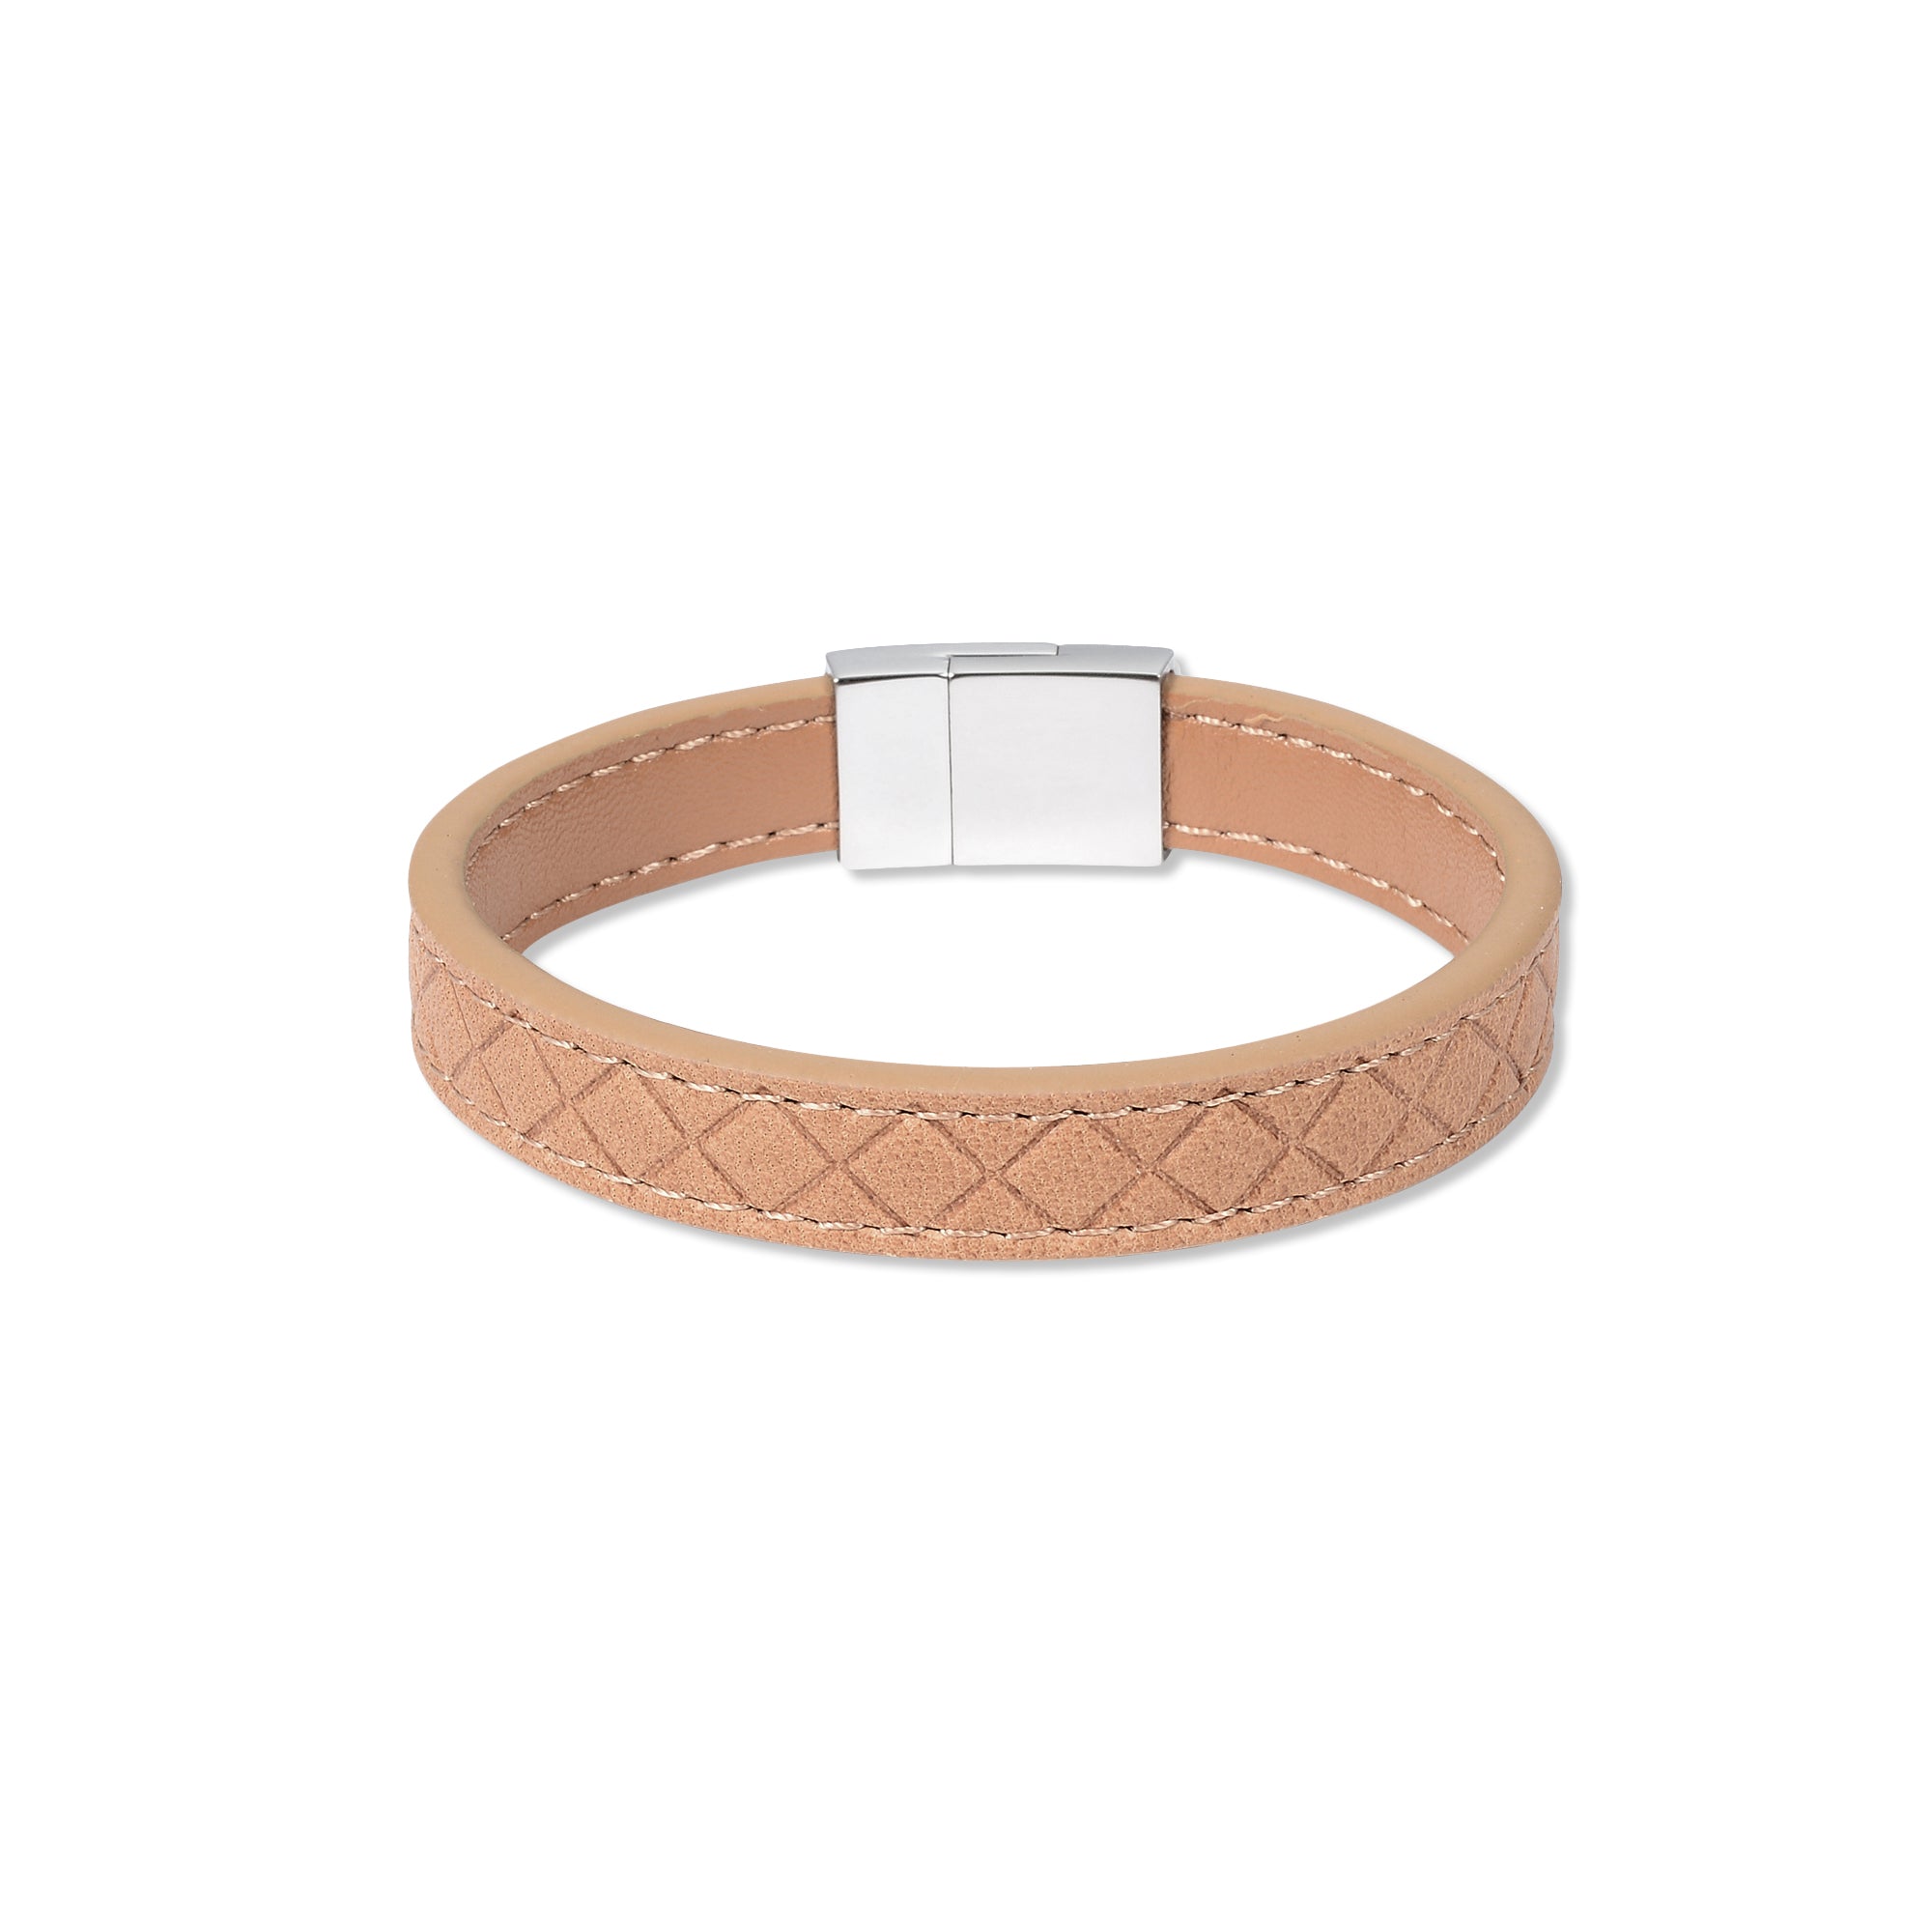 Tan Stitched Stainless Steel Bracelet